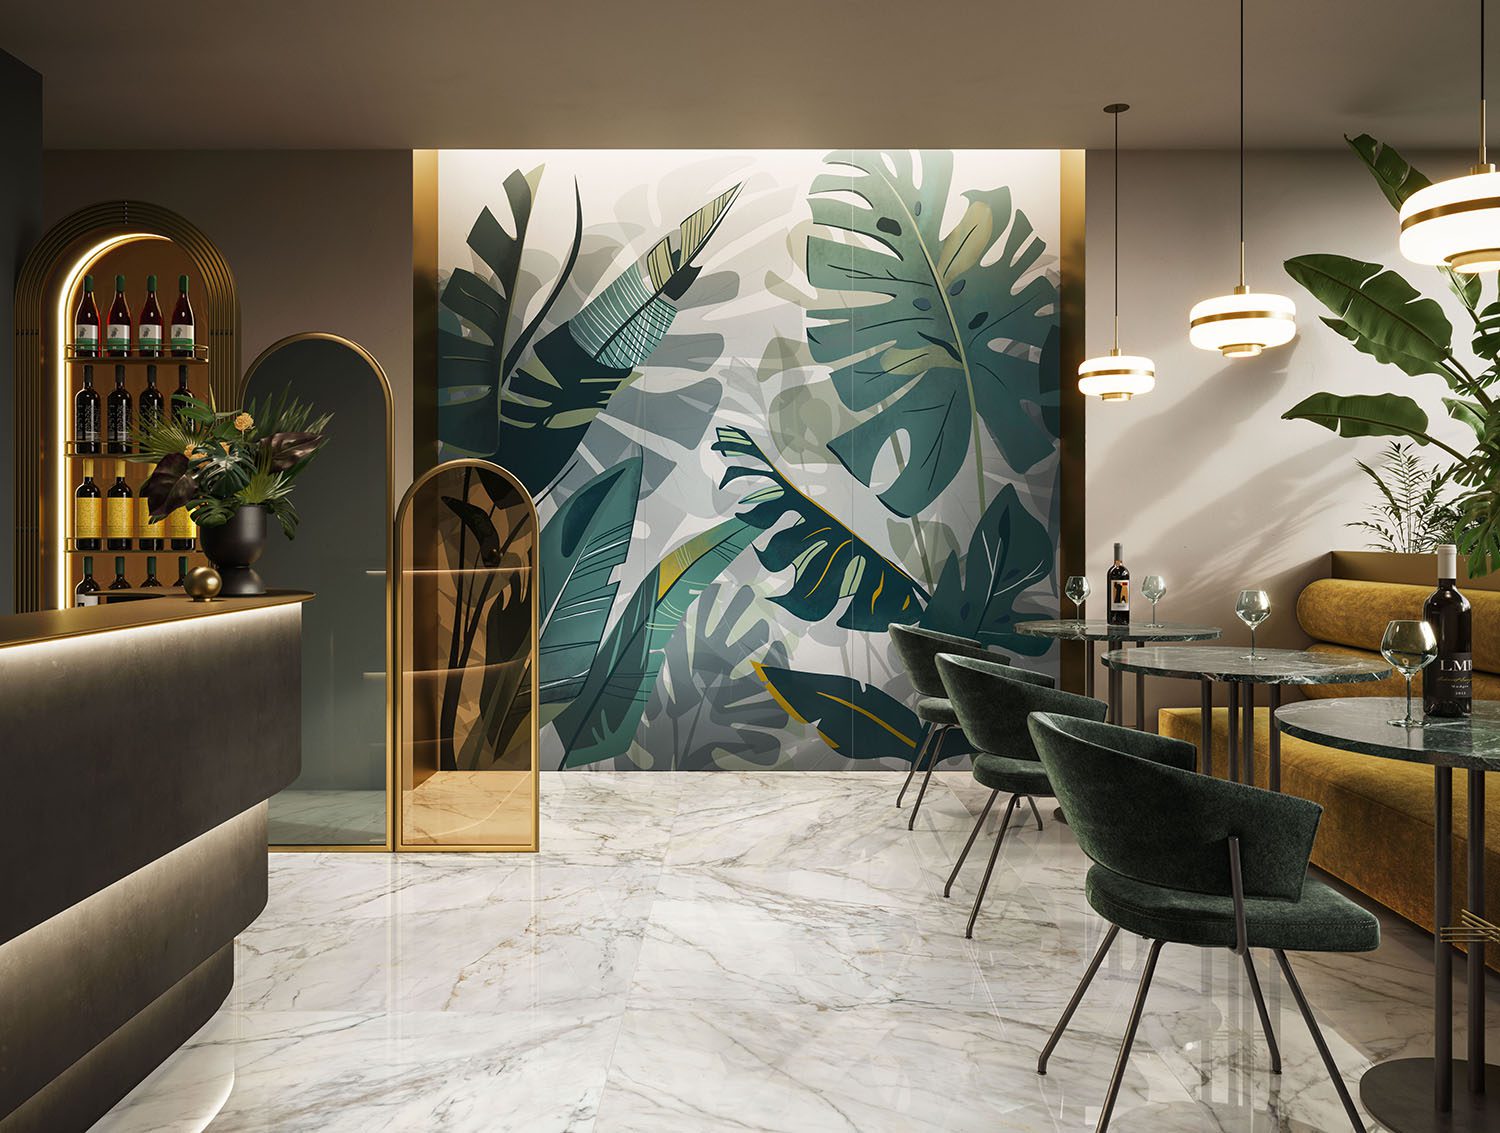 A lounge or amenity space with Wonderwall Botany tile installed on the floors and walls.